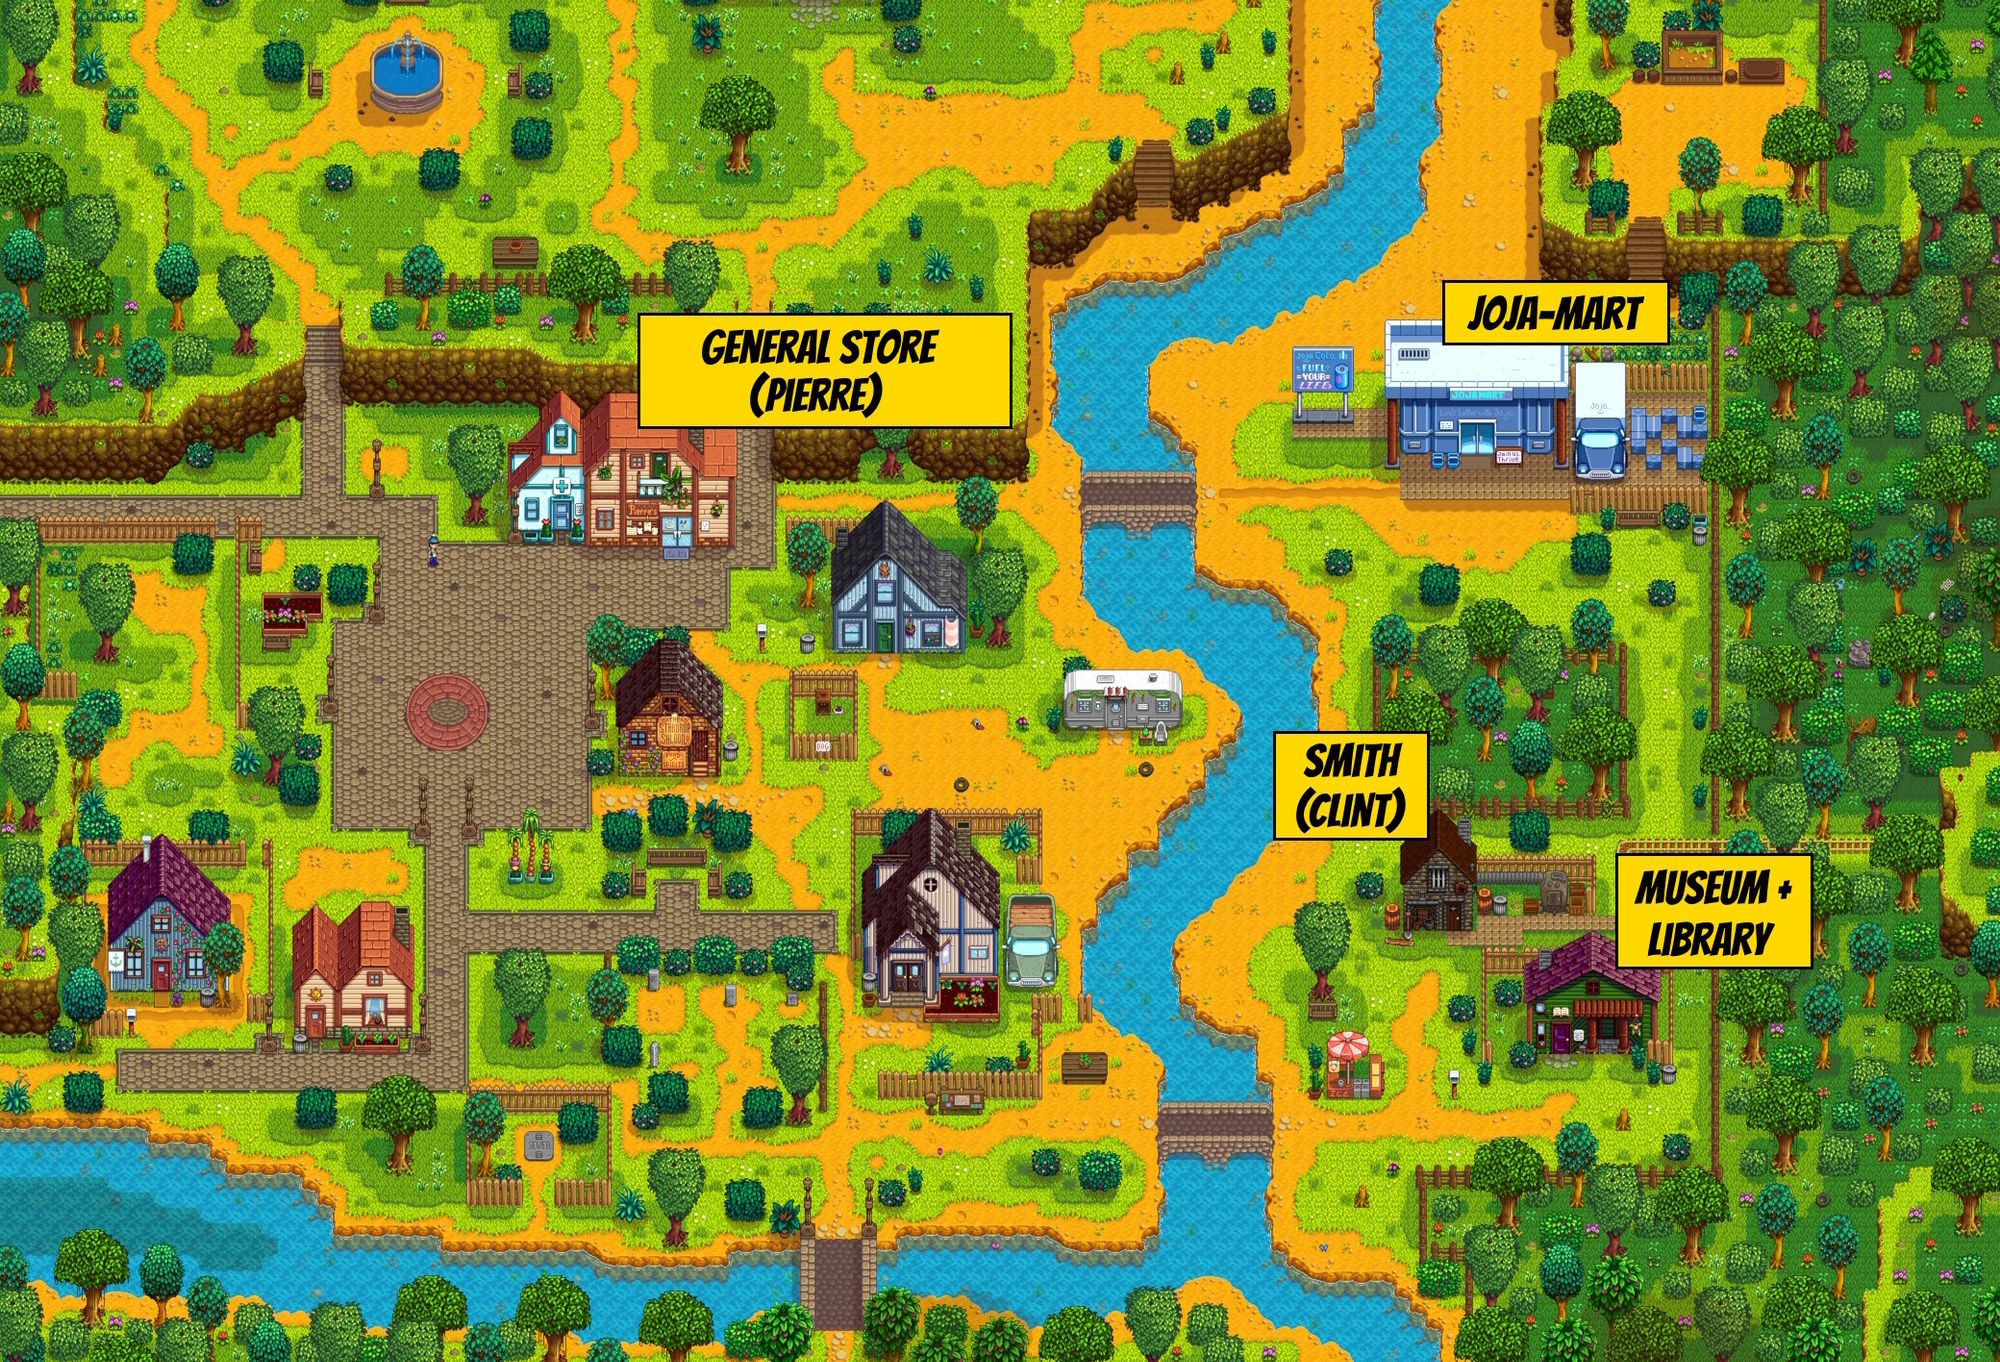 General store, blacksmith, museum and Joja Mart on one map in Stardew Valley